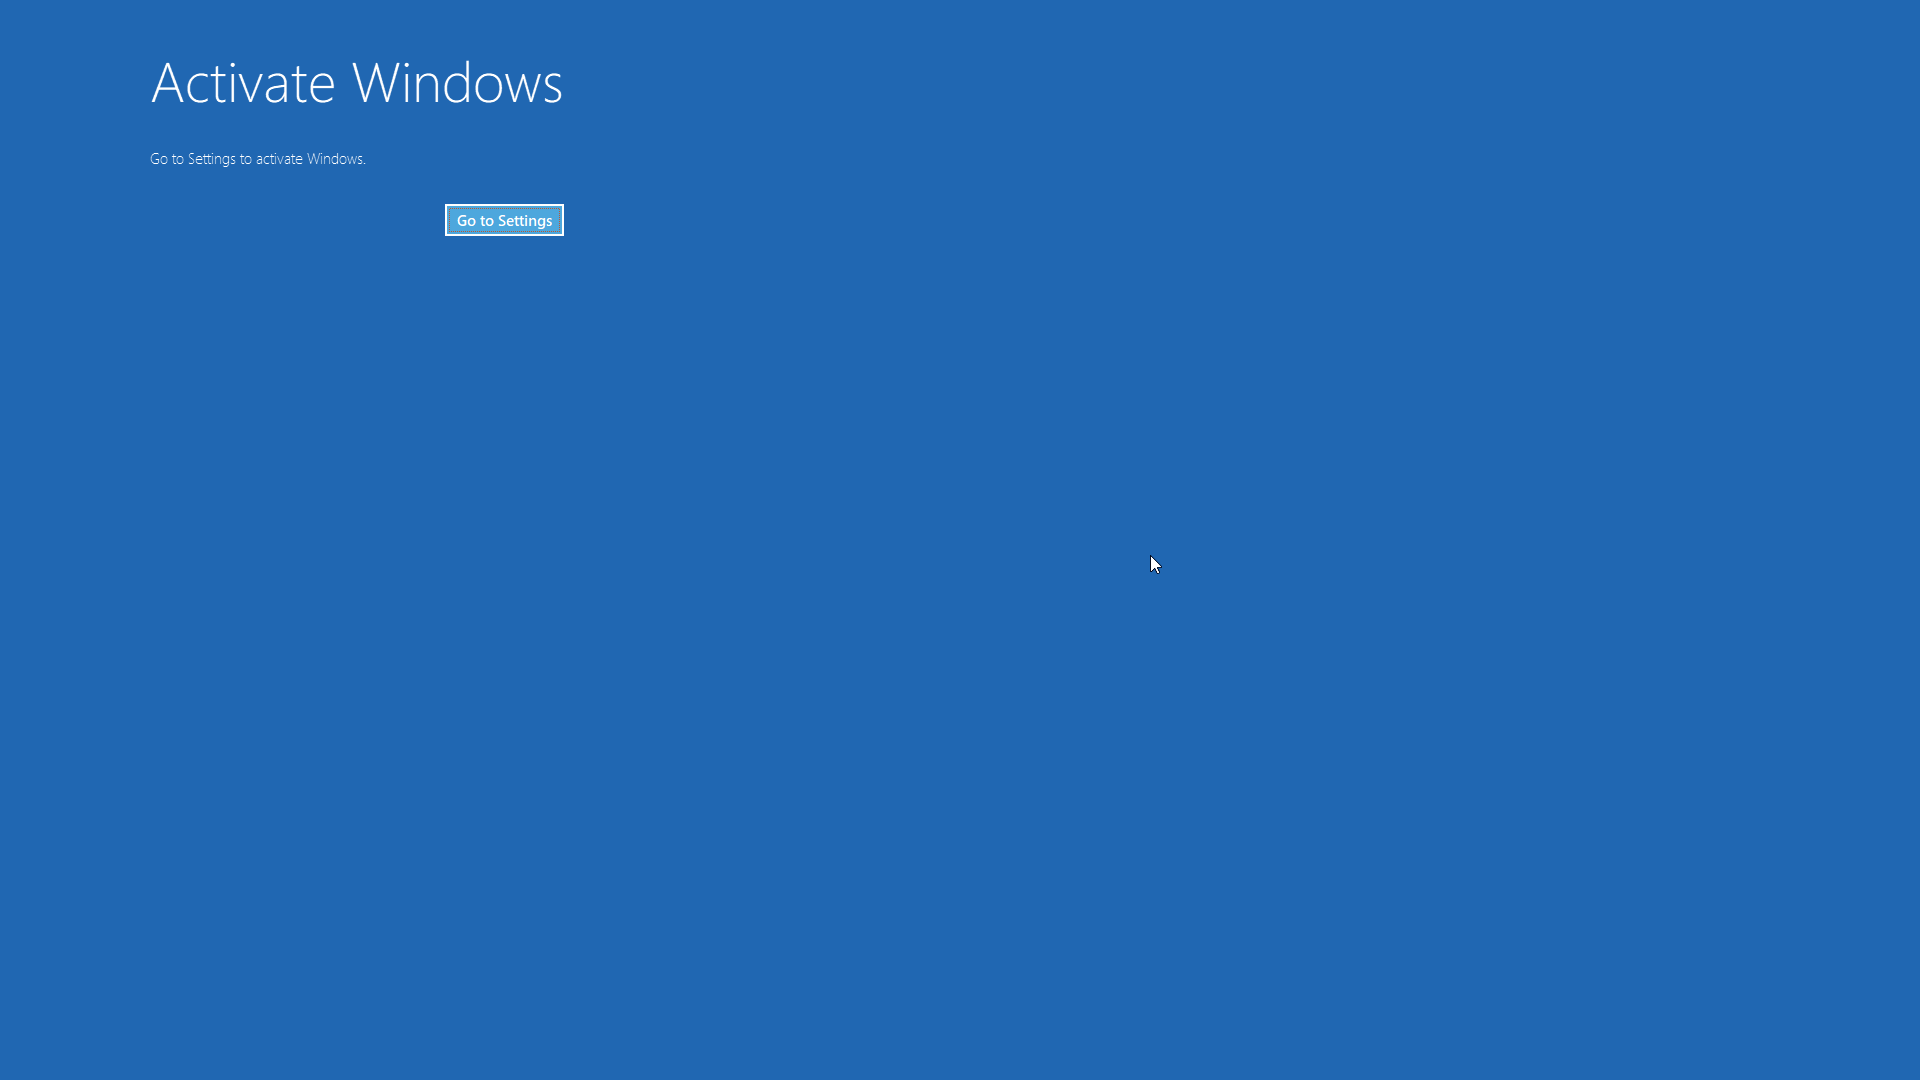 Windows activation screen in settings is blank, blue activation screen pops up repeatedly af96a968-f845-42e6-9c82-b044765d1c9c?upload=true.png